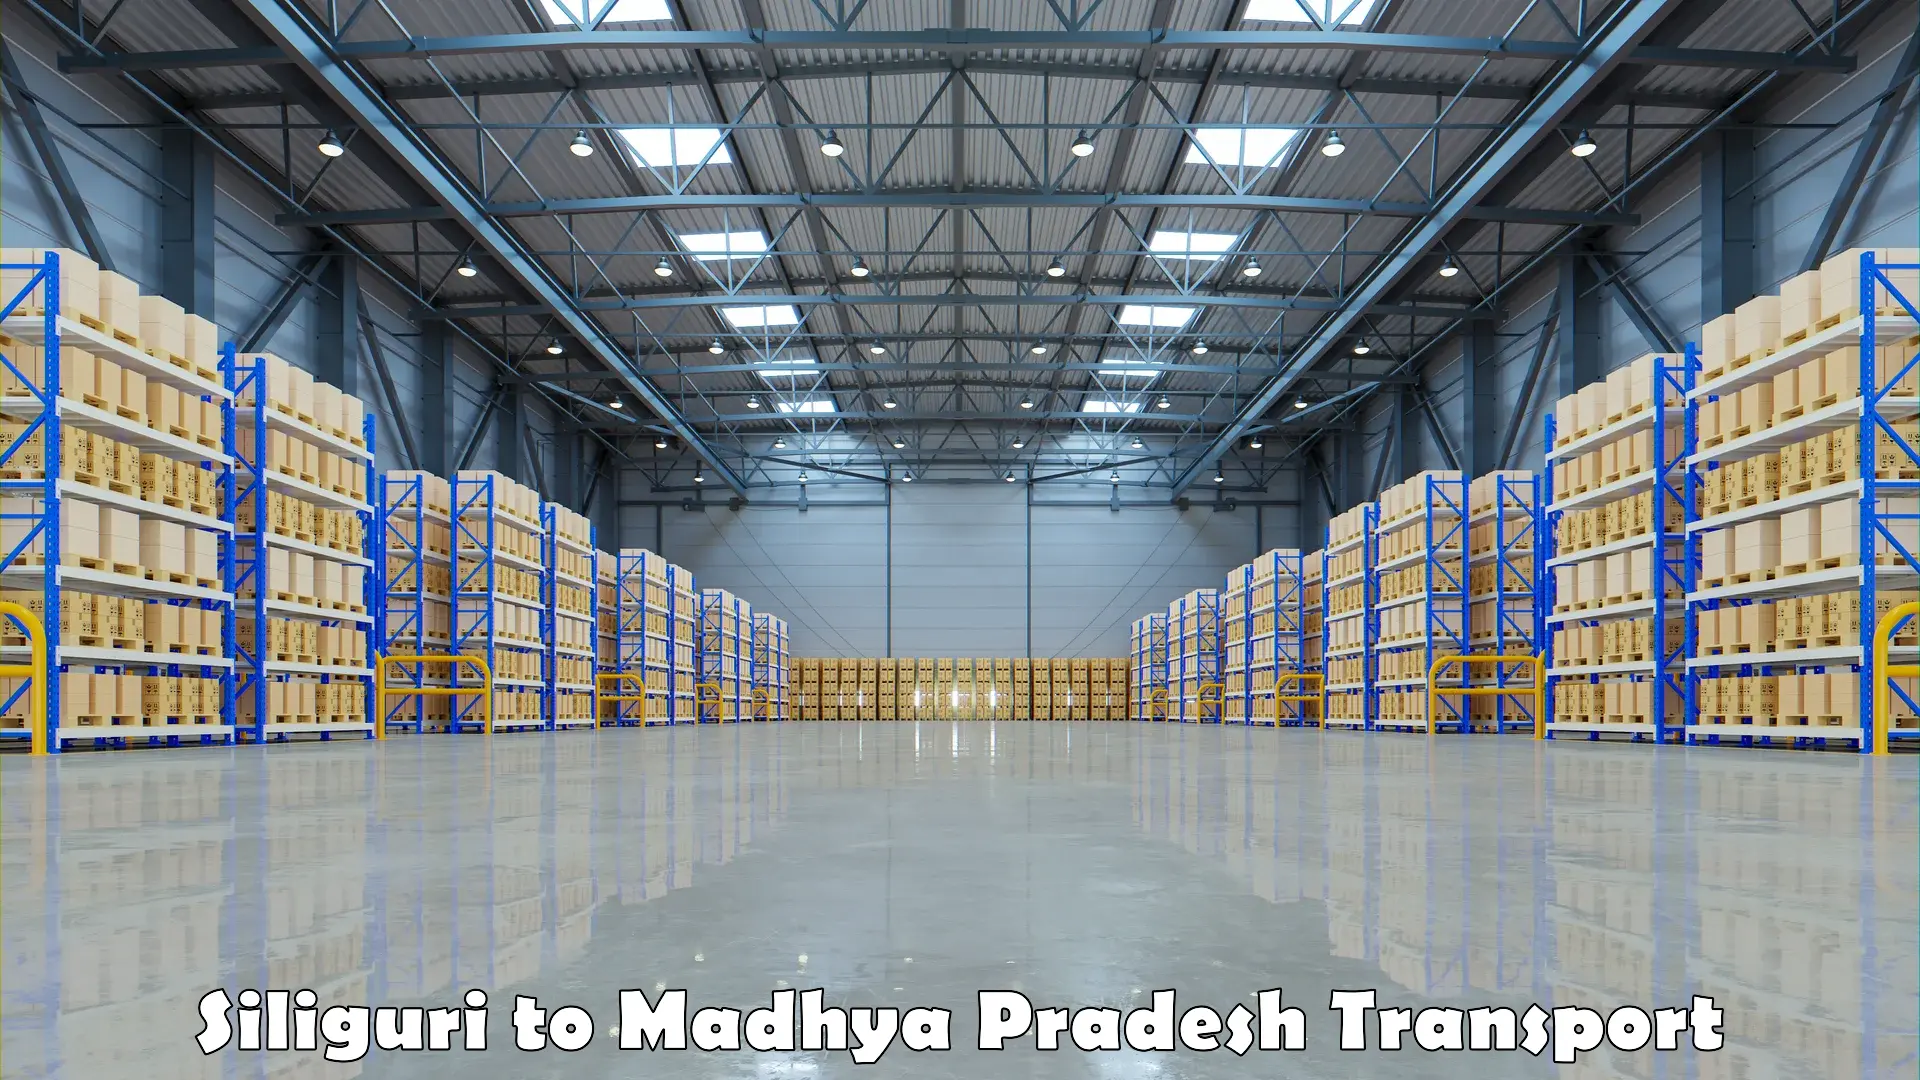 Transportation solution services Siliguri to Neemuch